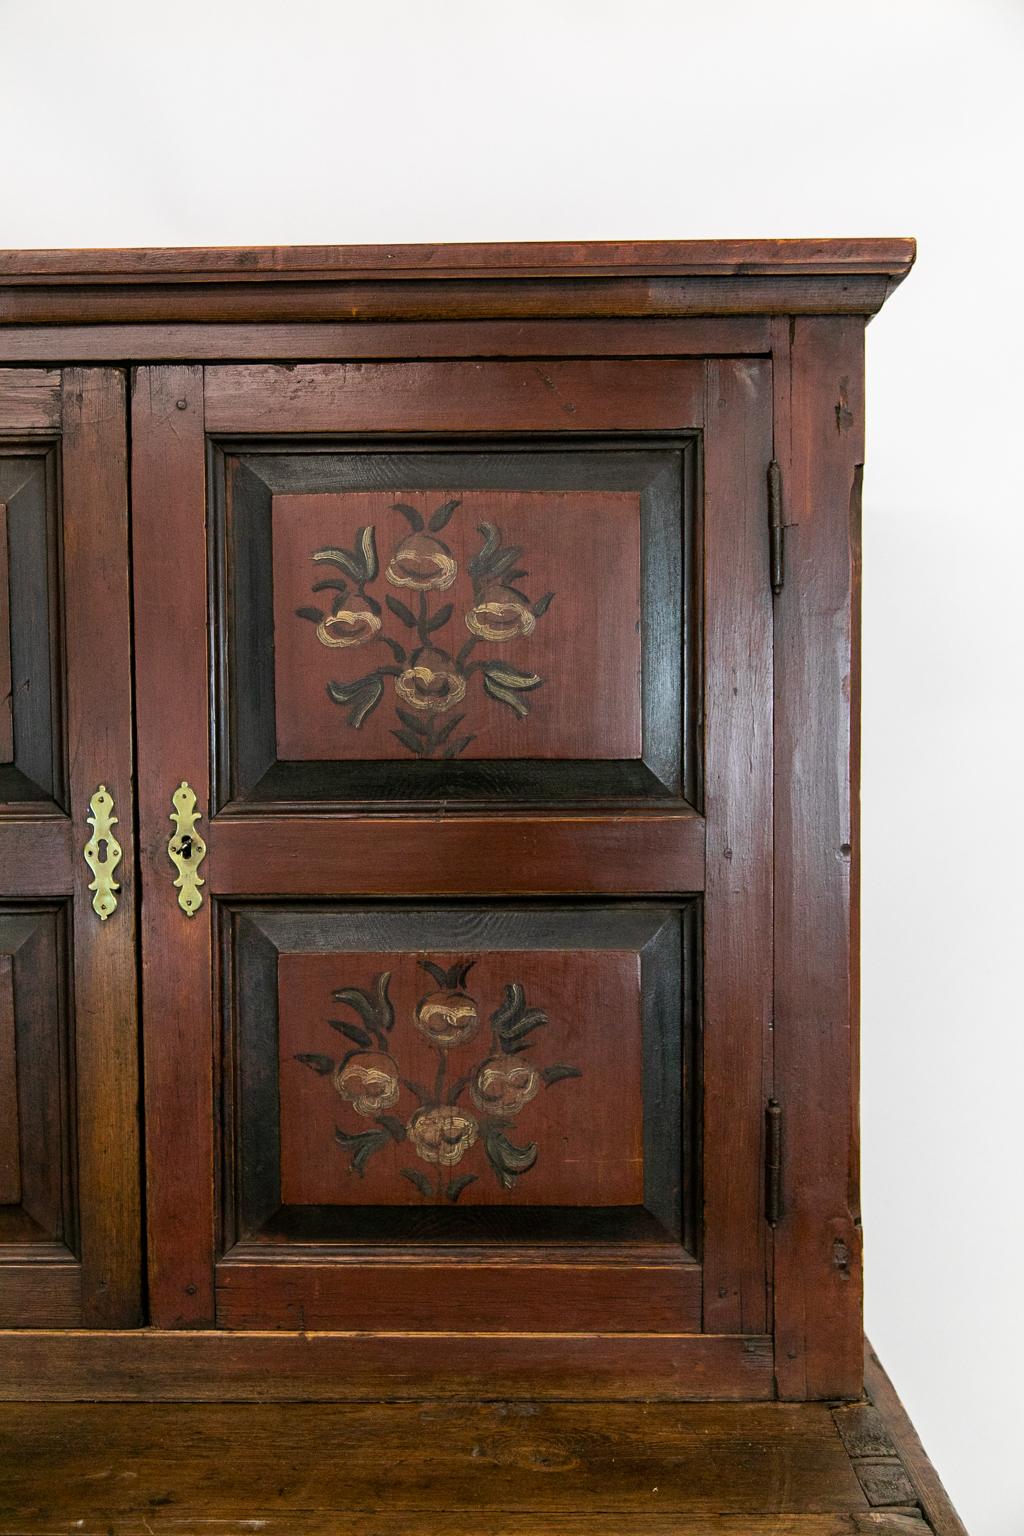 This step back cupboard has raised panel doors on the top and bottom sections. The upper doors are painted with floral motifs. The lower drawers have the original red paint. There is exposed peg construction throughout as well as large dove tail